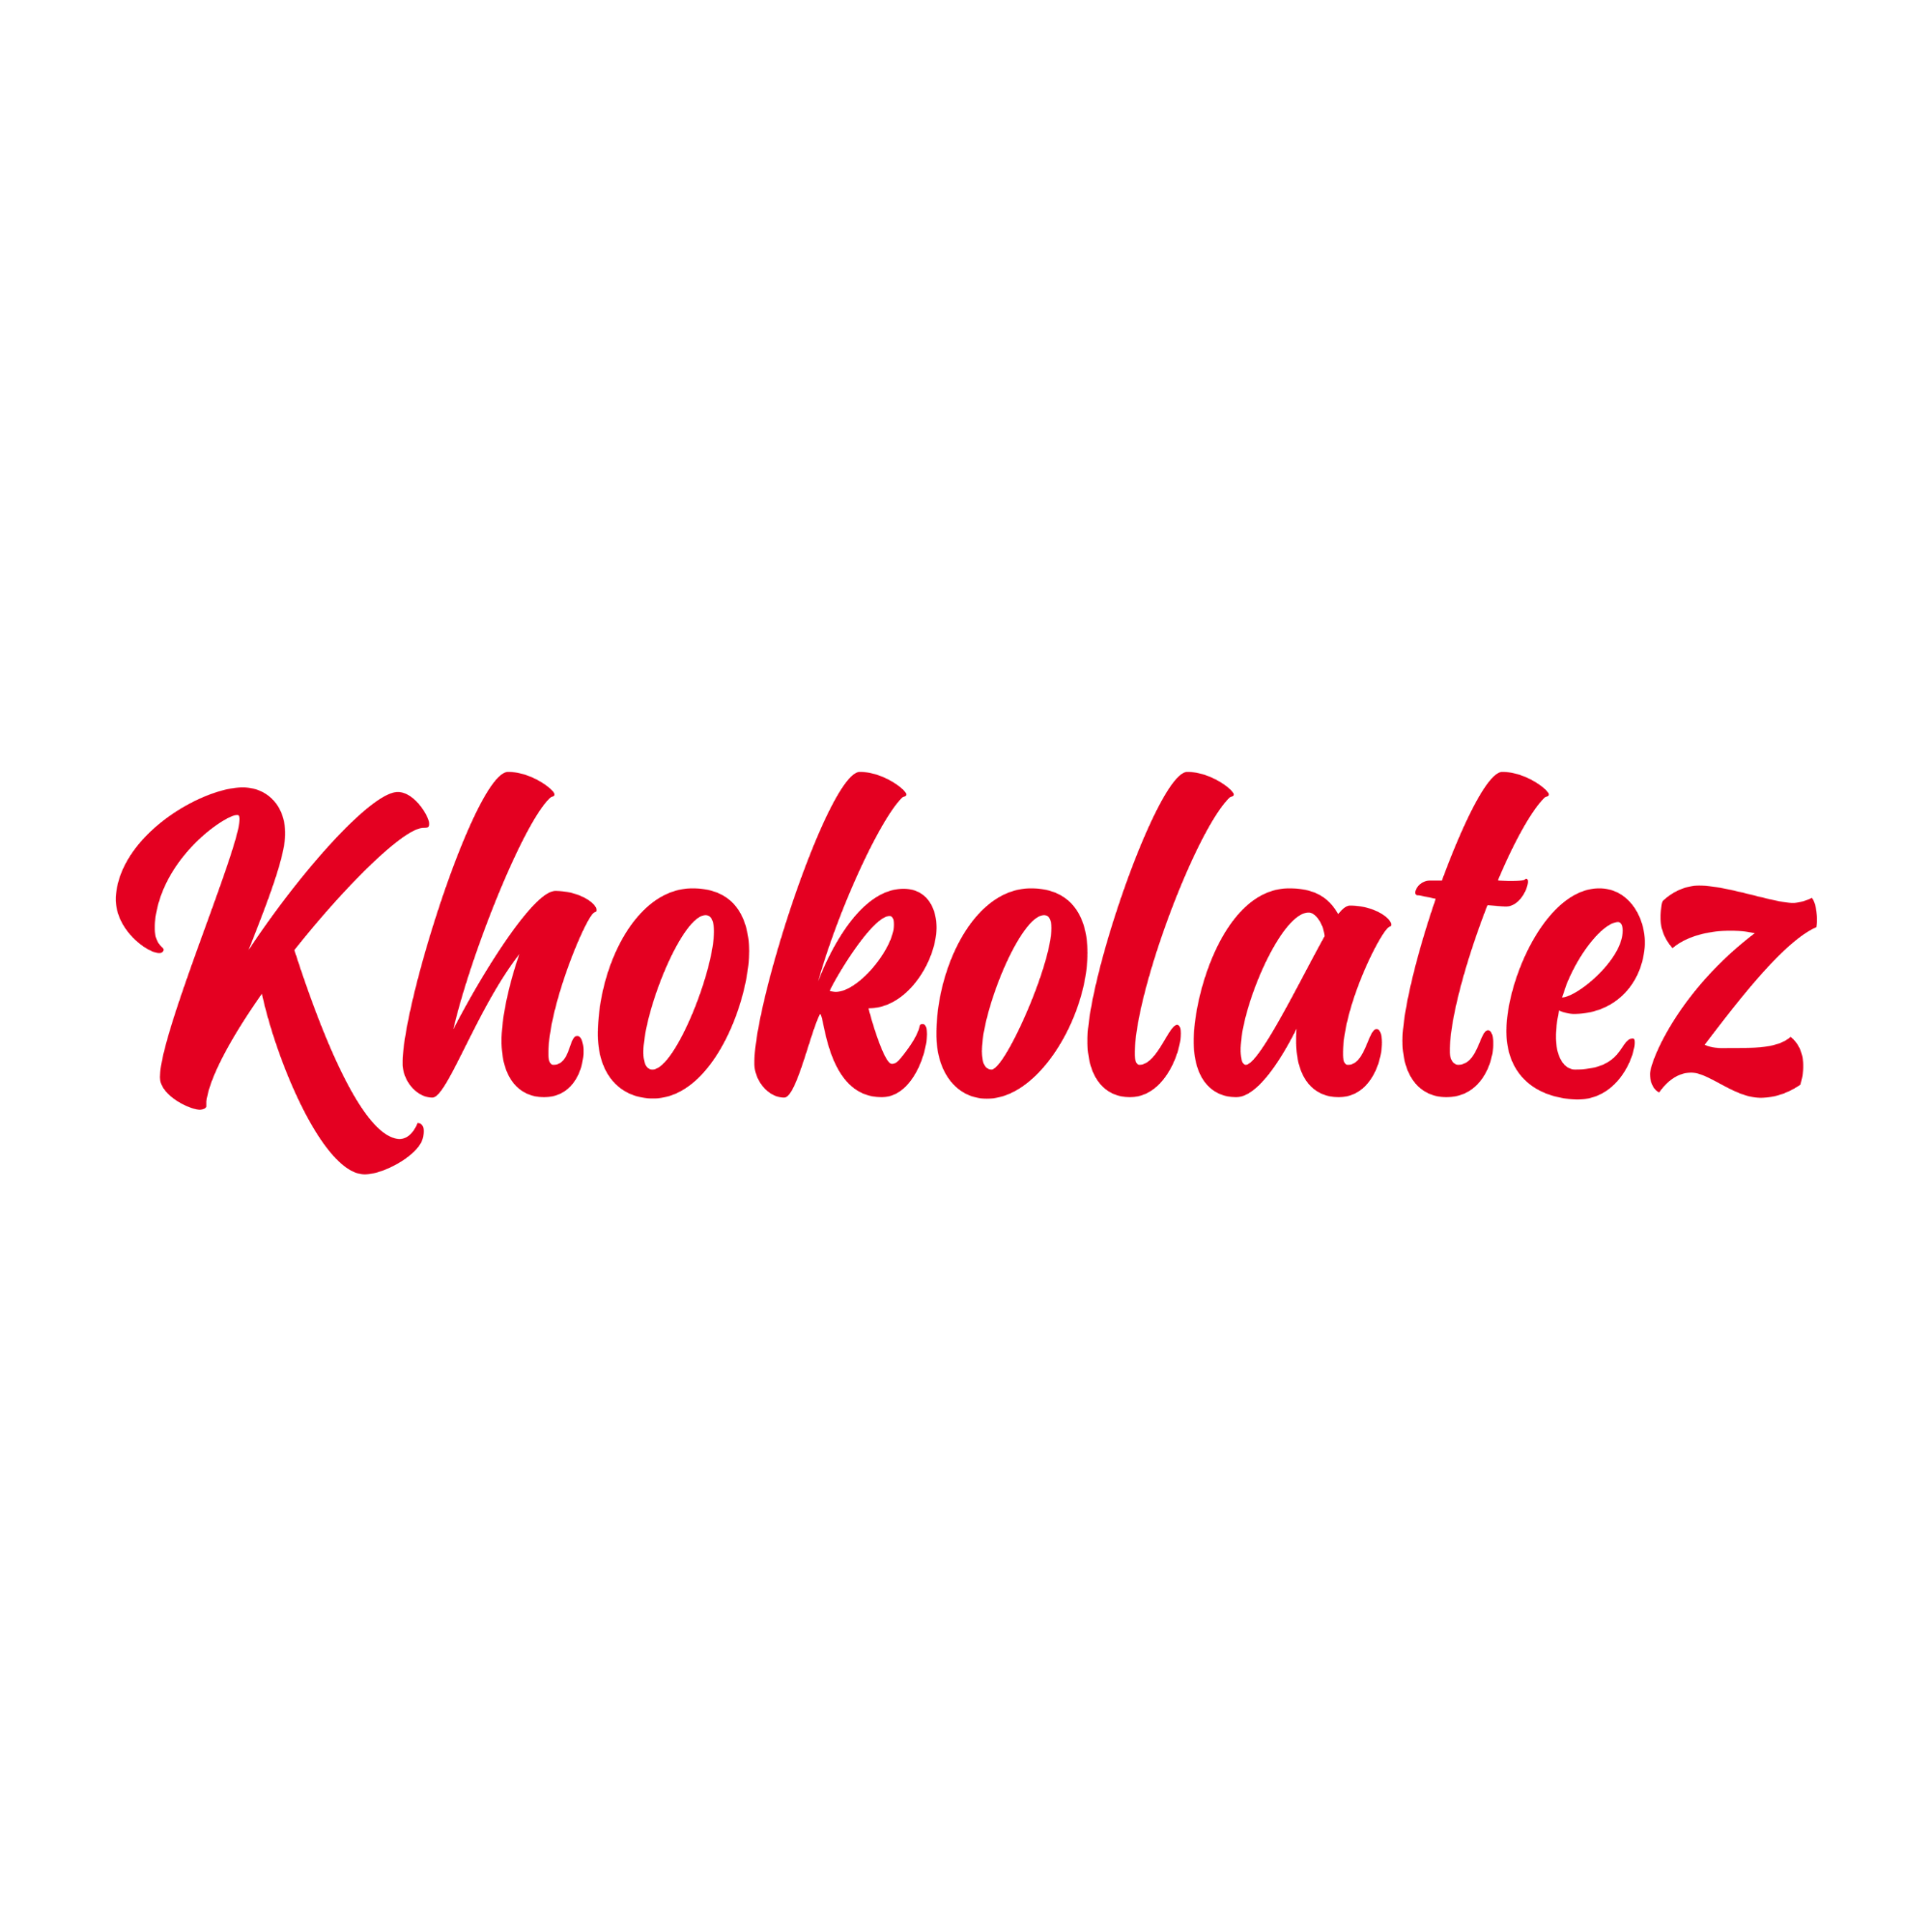 Khokolatez is a brand of high milligram infused chocolates with Delta9 and HHC.